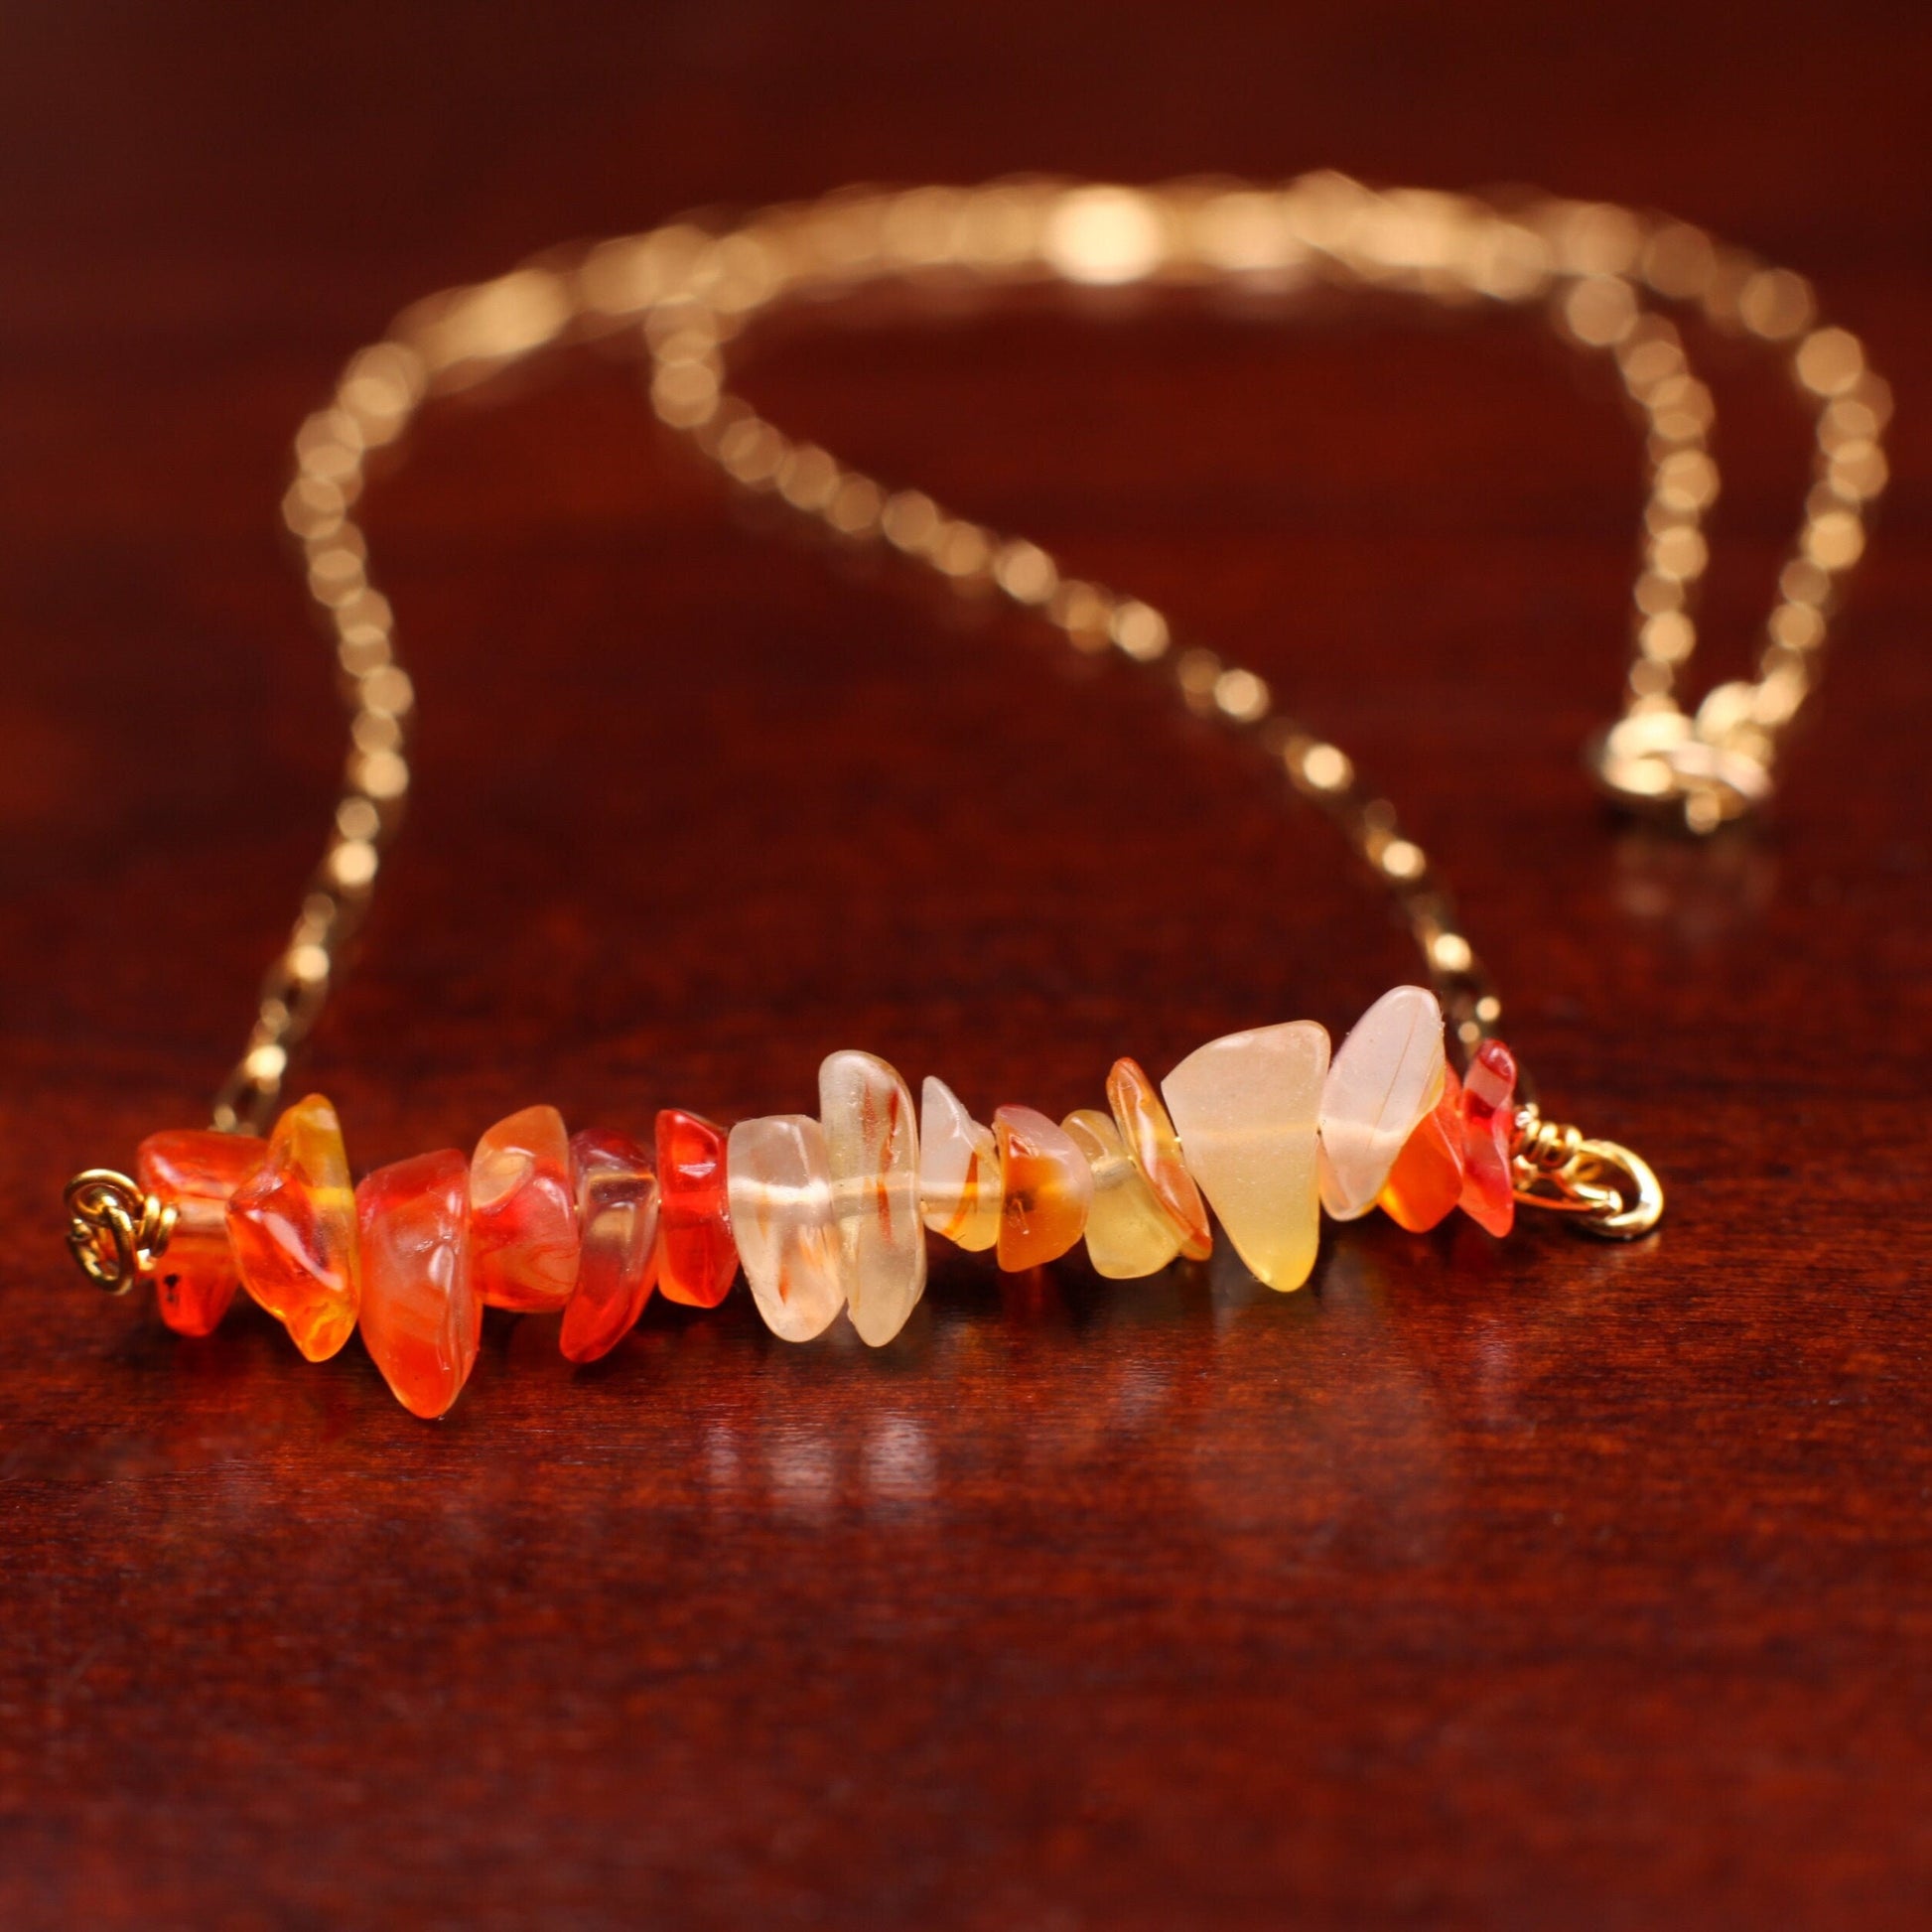 Natural Carnelian 5-10mm Raw Freeform Chips in 14K Gold Filled or 925 Sterling Silver Bar Necklace, Healing Crystal,Chakra,August Birthstone